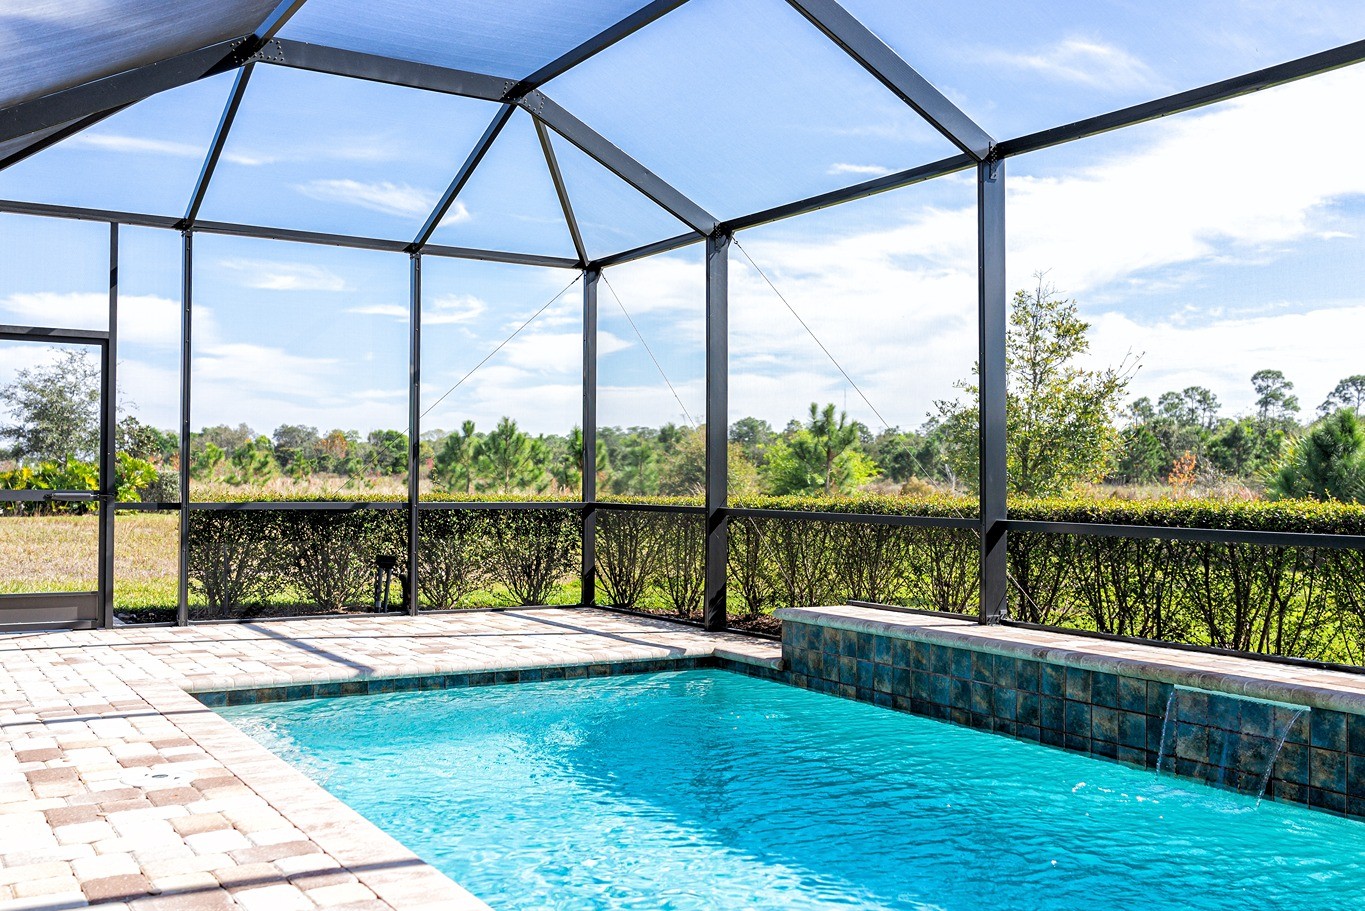 Featured image for post: How to Clean Screen Enclosures for Pools and Patios